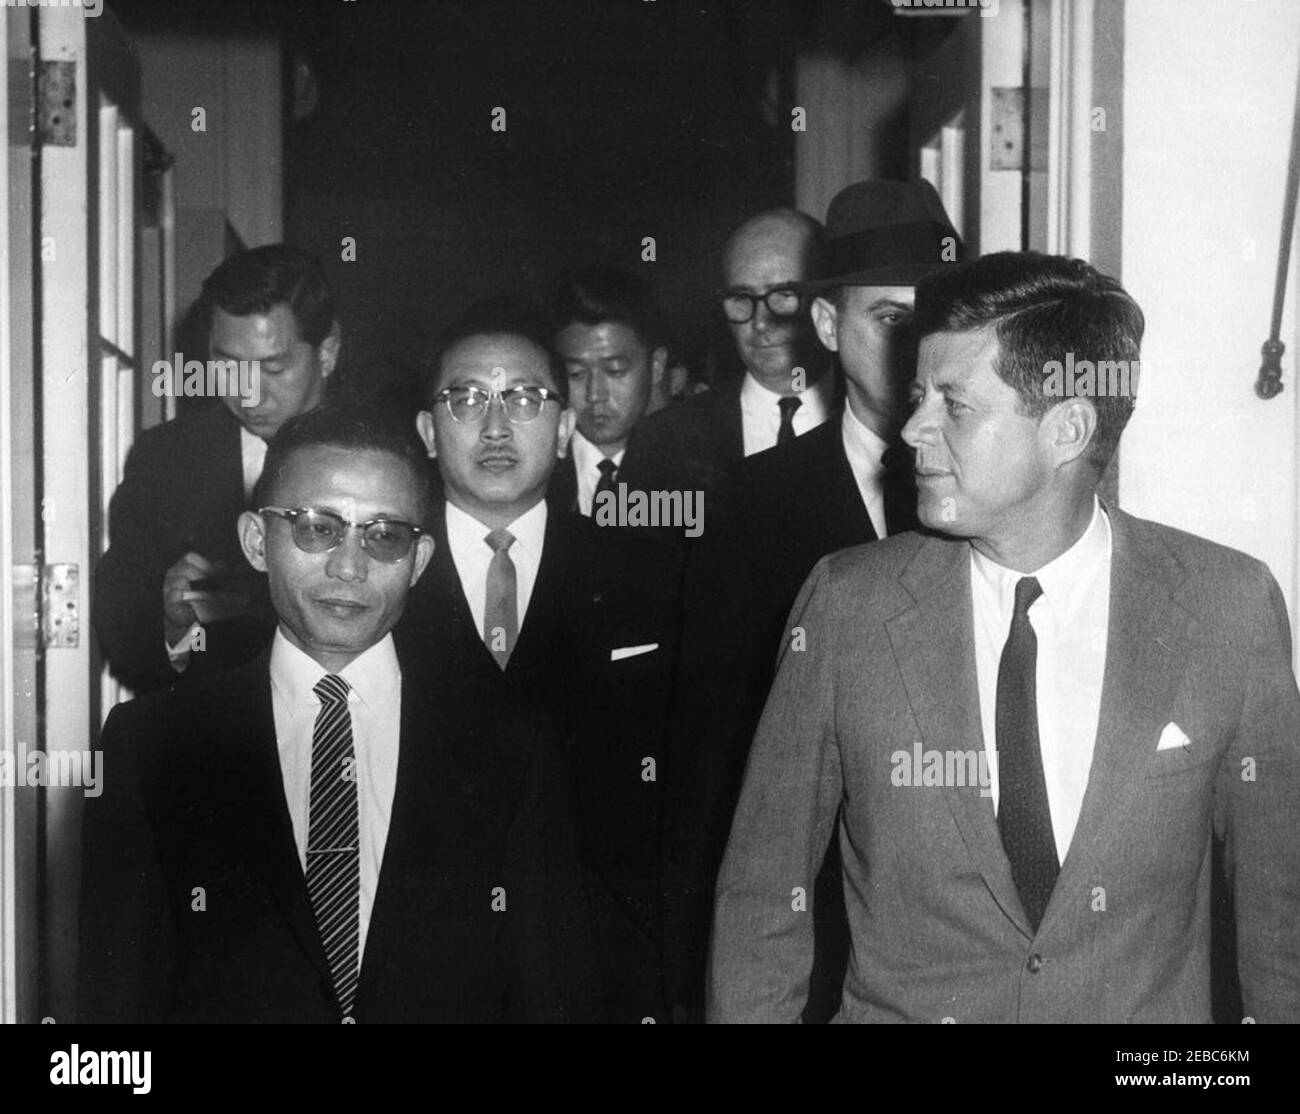 General Chung Hee Park, Chairman, Supreme Council of Korea, pays farewell call on the President, 4:00PM. President John F. Kennedy and General Chung Hee Park, Chairman of the Supreme Council for National Reconstruction of the Republic of Korea, leave the White House after General Parku0027s farewell visit with President Kennedy. Also included in the photograph are Il Kwon Chung, Korean Ambassador to the United States (center, wearing glasses); and Special Assistant to the President Dave Powers (in back, wearing glasses). West Wing Entrance, White House, Washington, D.C. Stock Photo